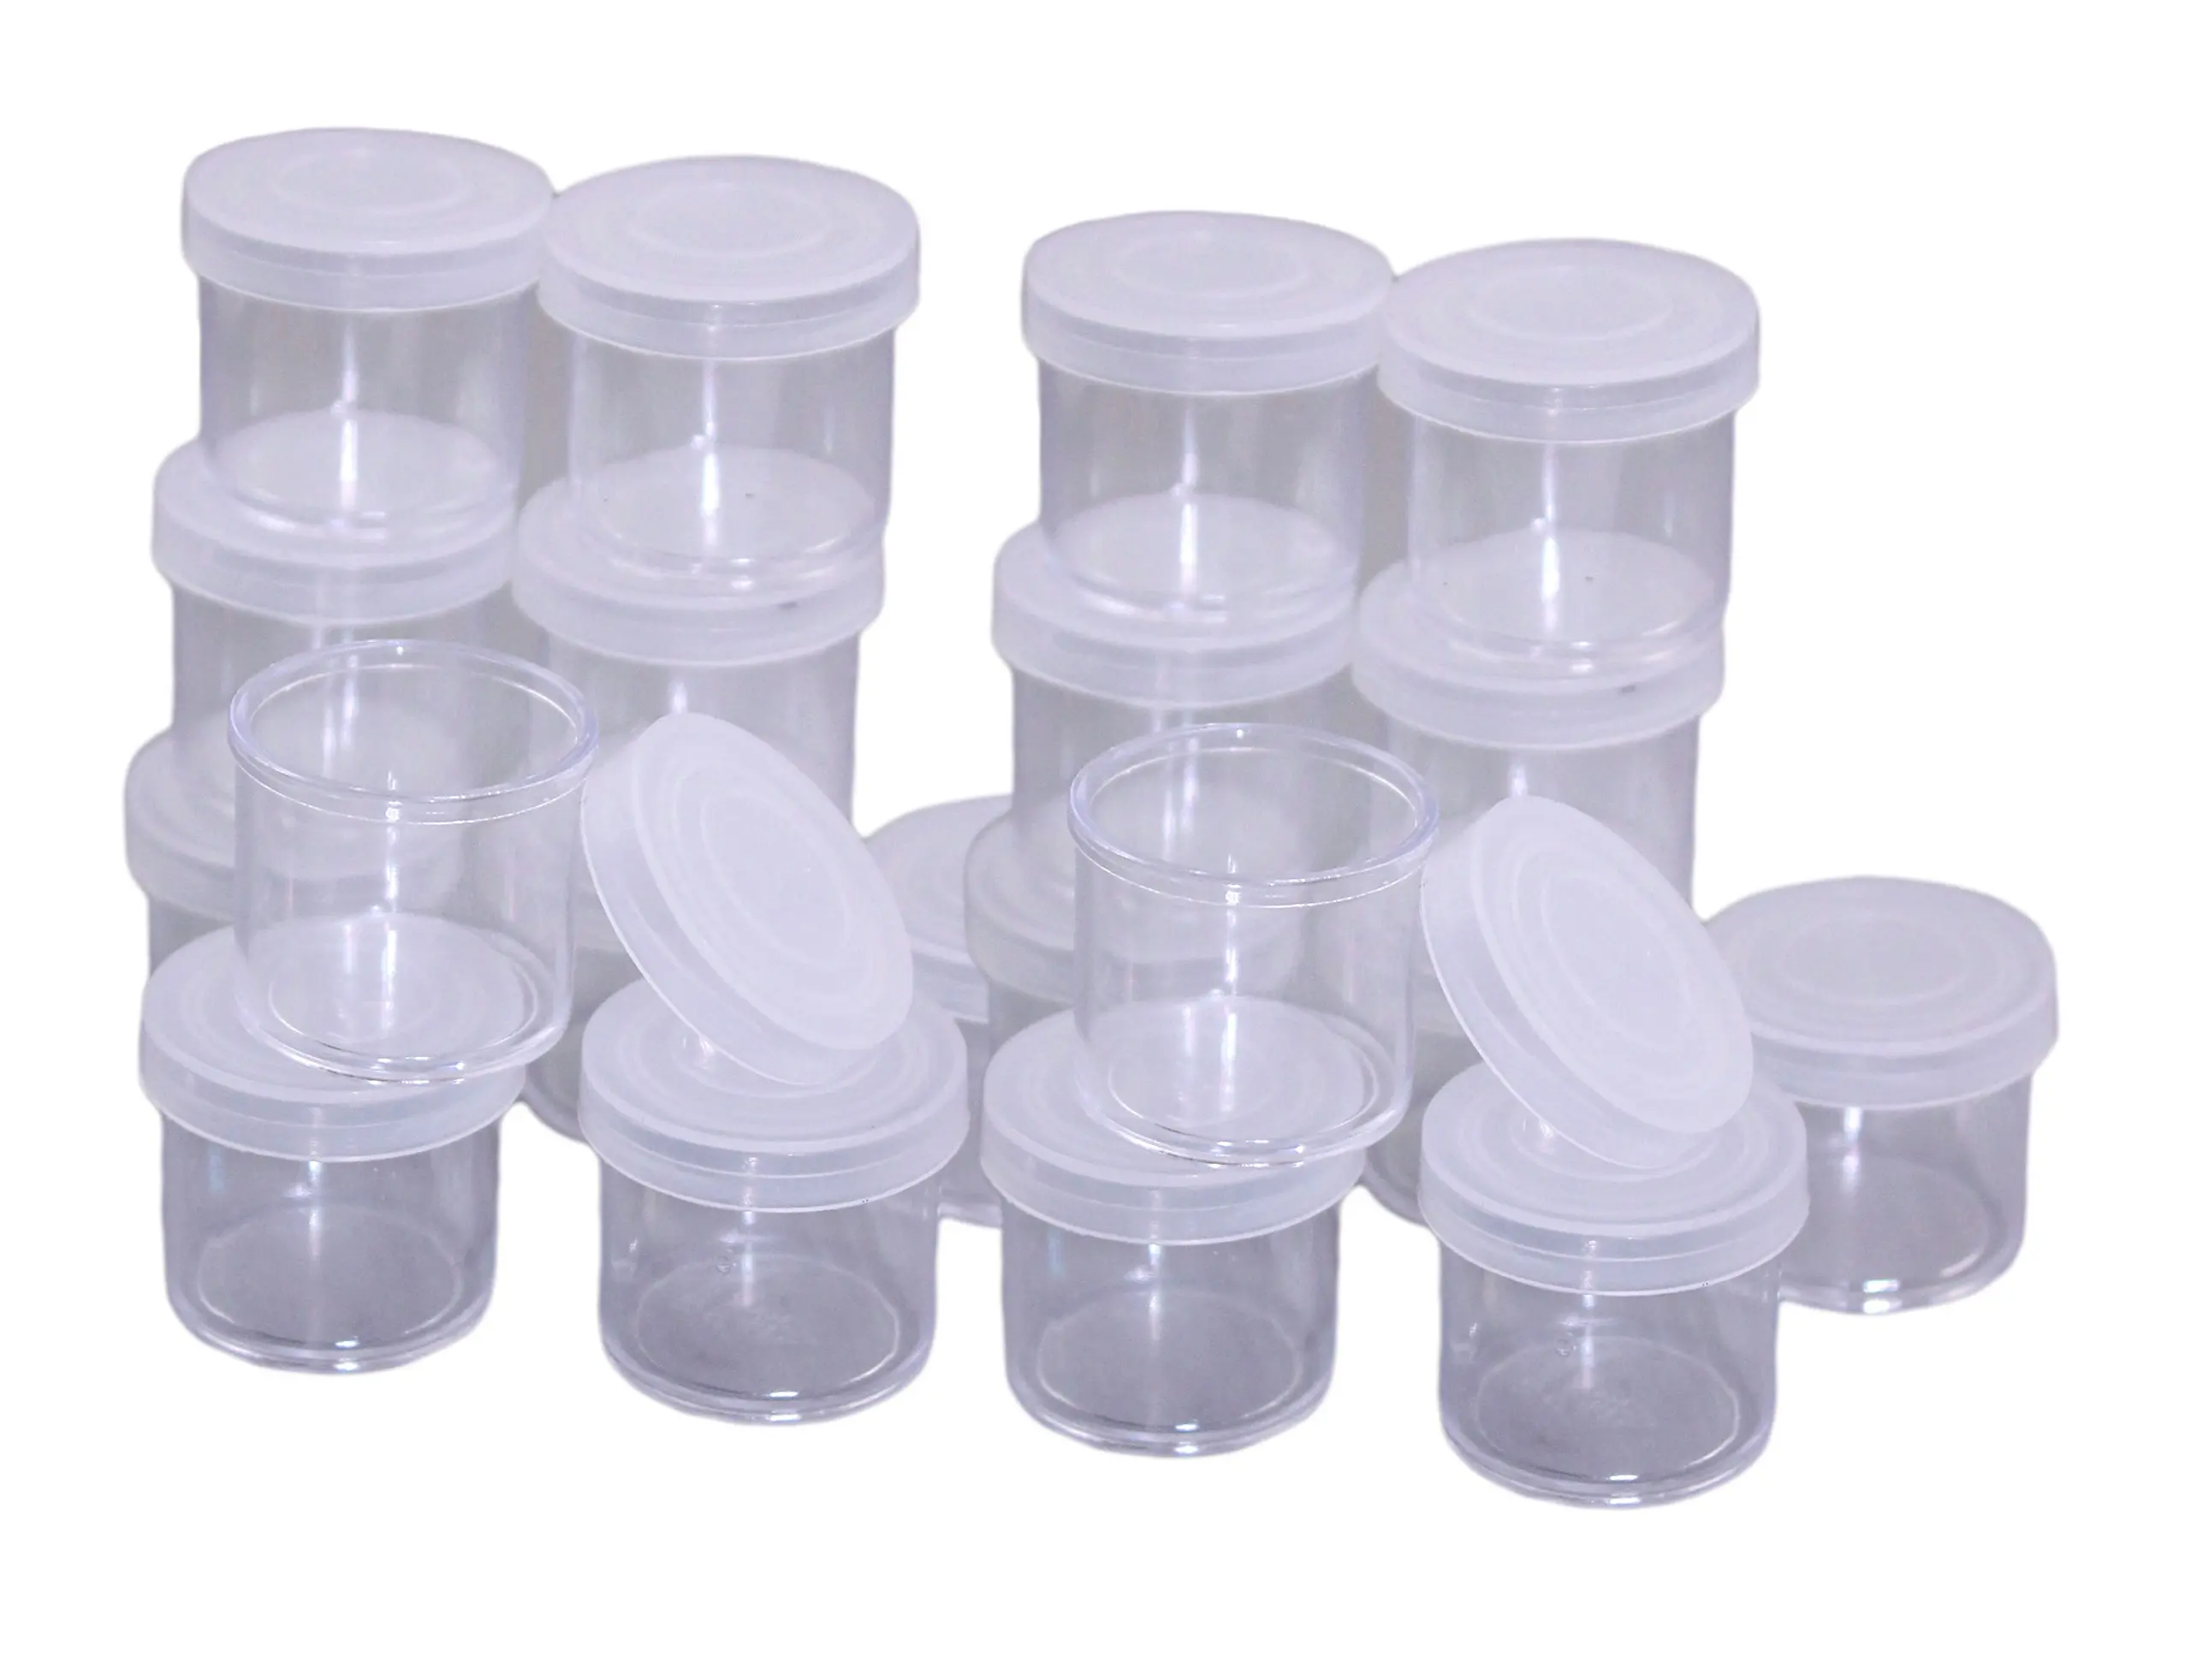 Mini Plastic Containers With Lids : Top 15 2 Ounce Plastic Containers ...